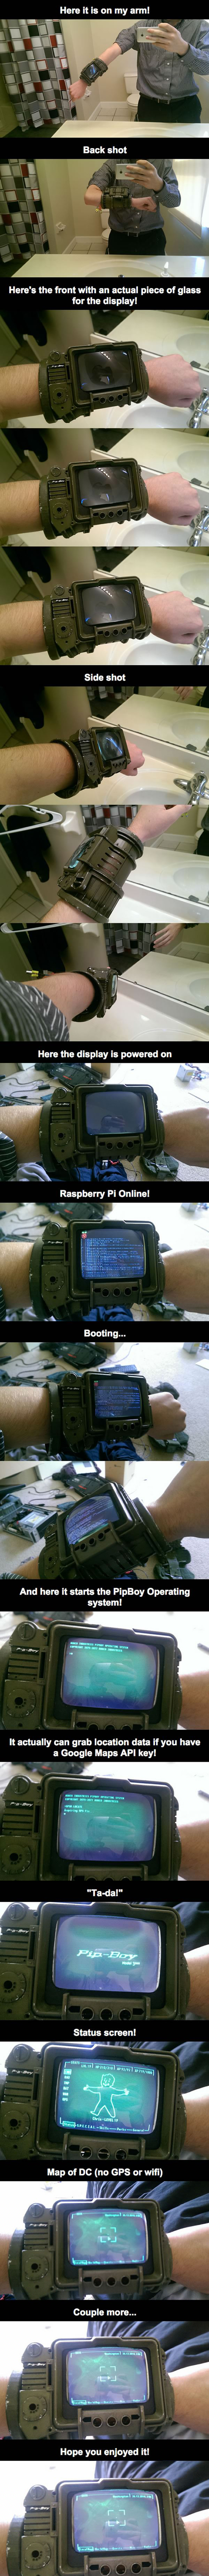 This guy made a PipBoy 3000A using Rasberry Pi